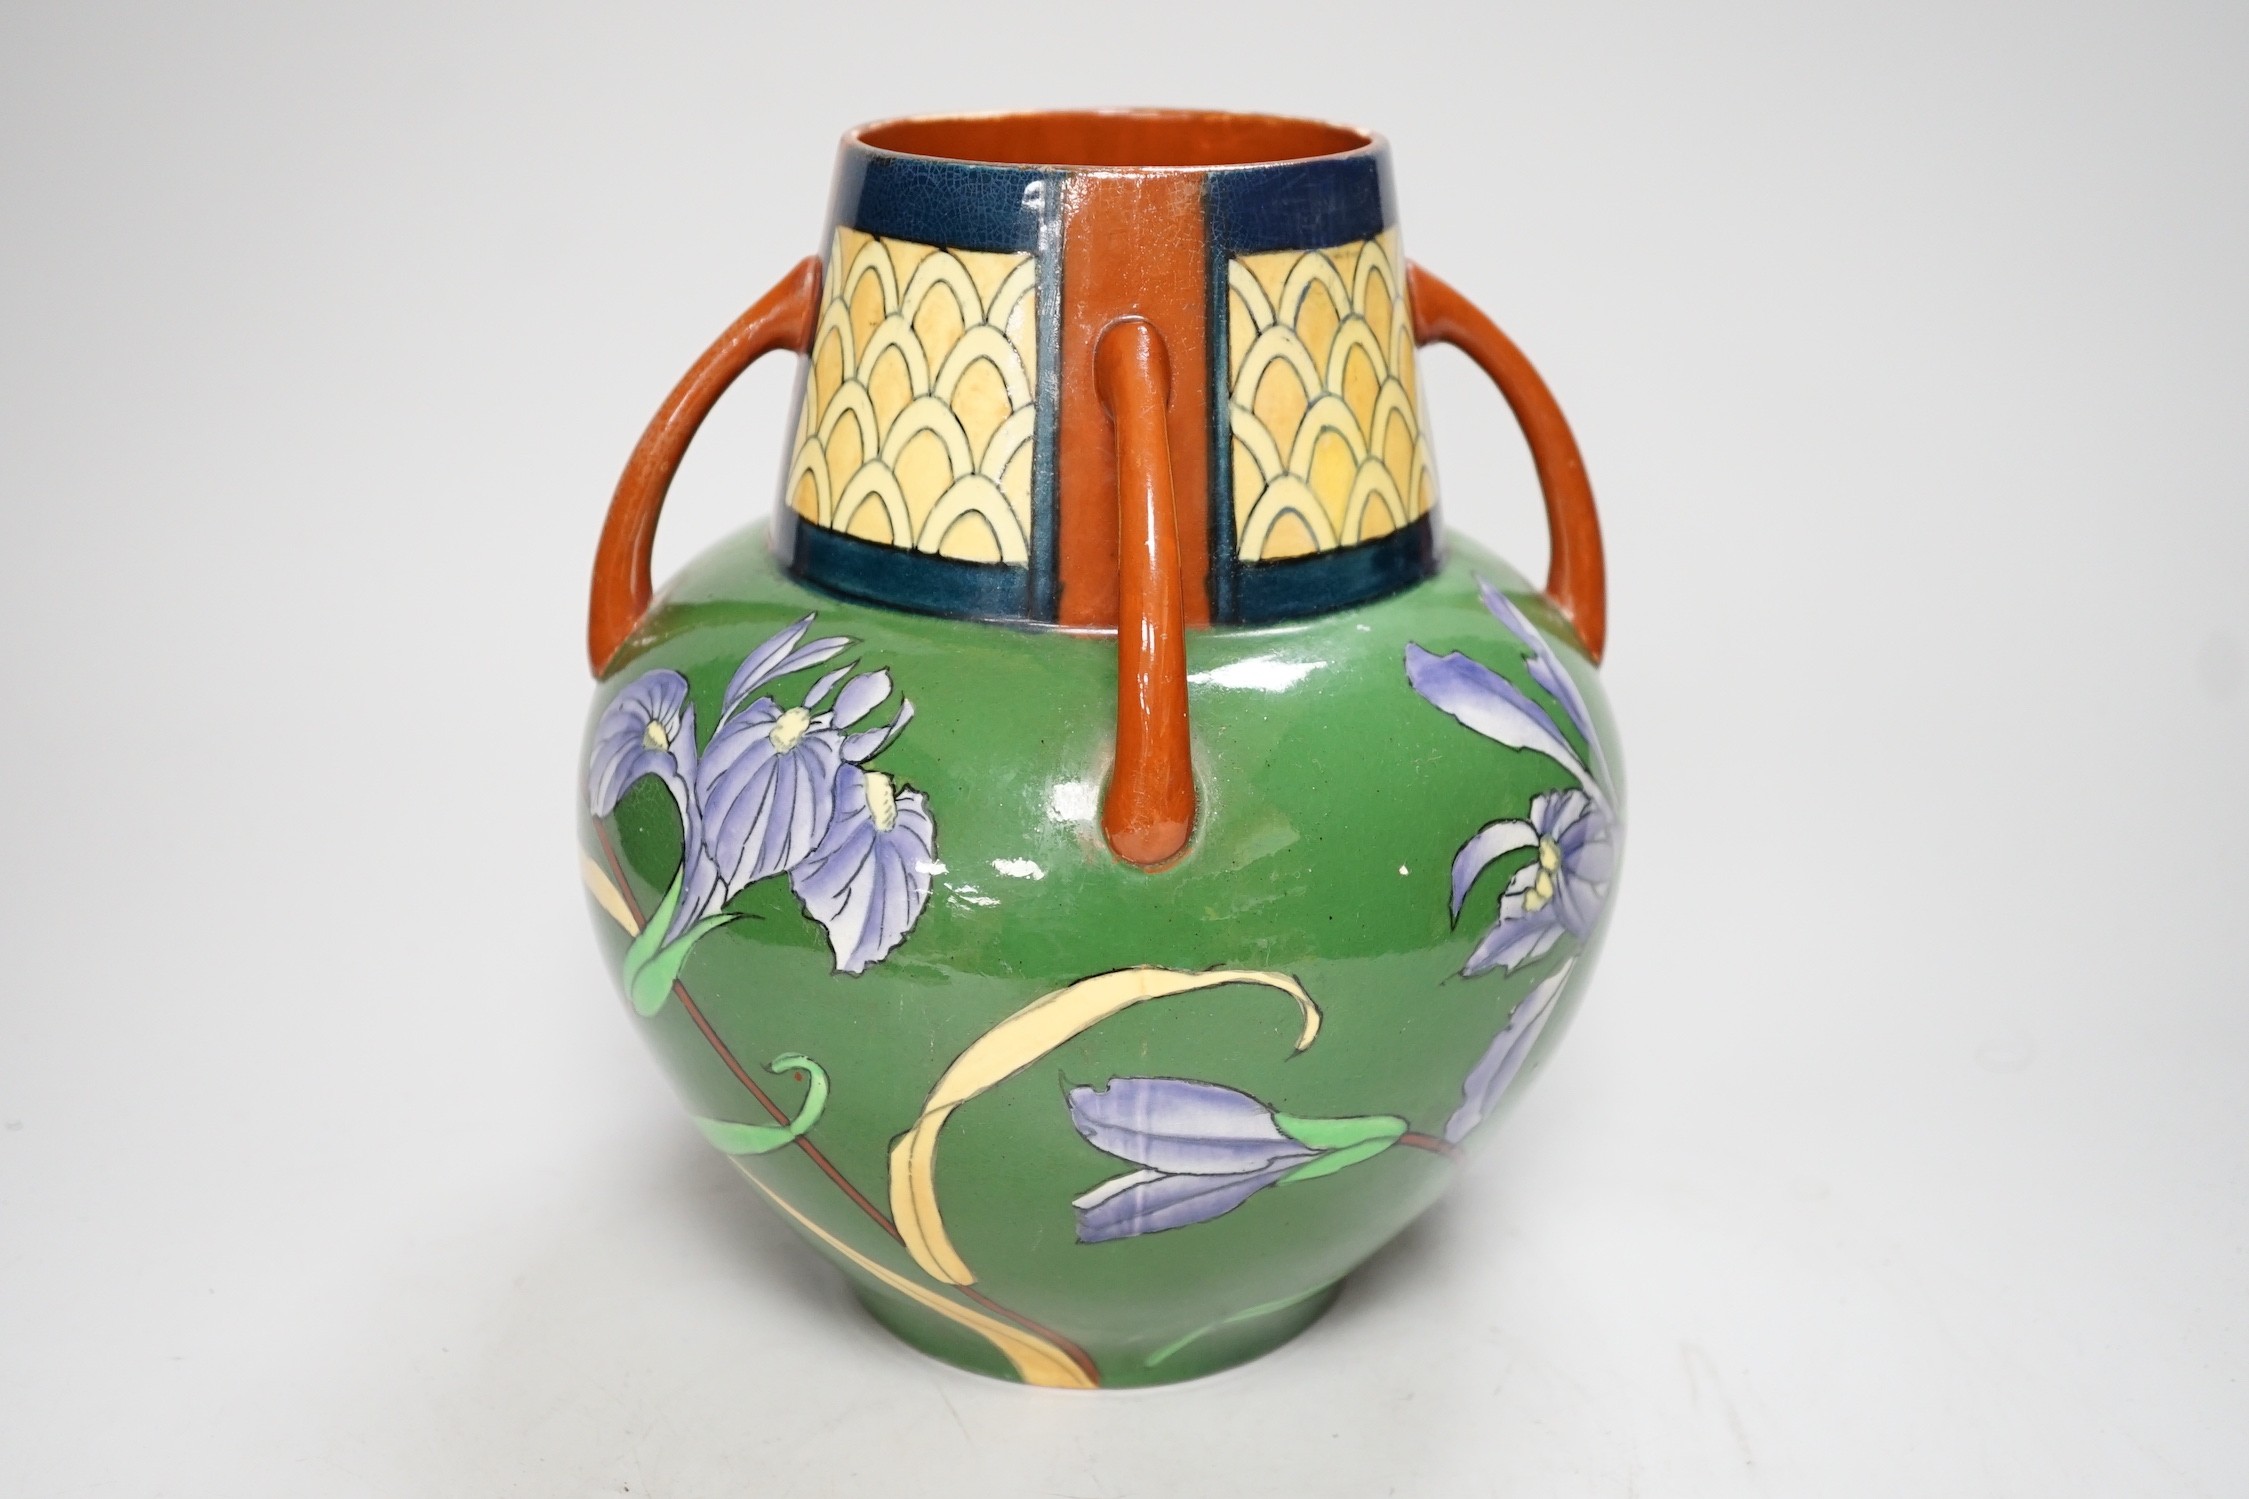 A Foley “Intarsio” vase decorated with Irises, numbered 3003, 21cm - Image 2 of 4